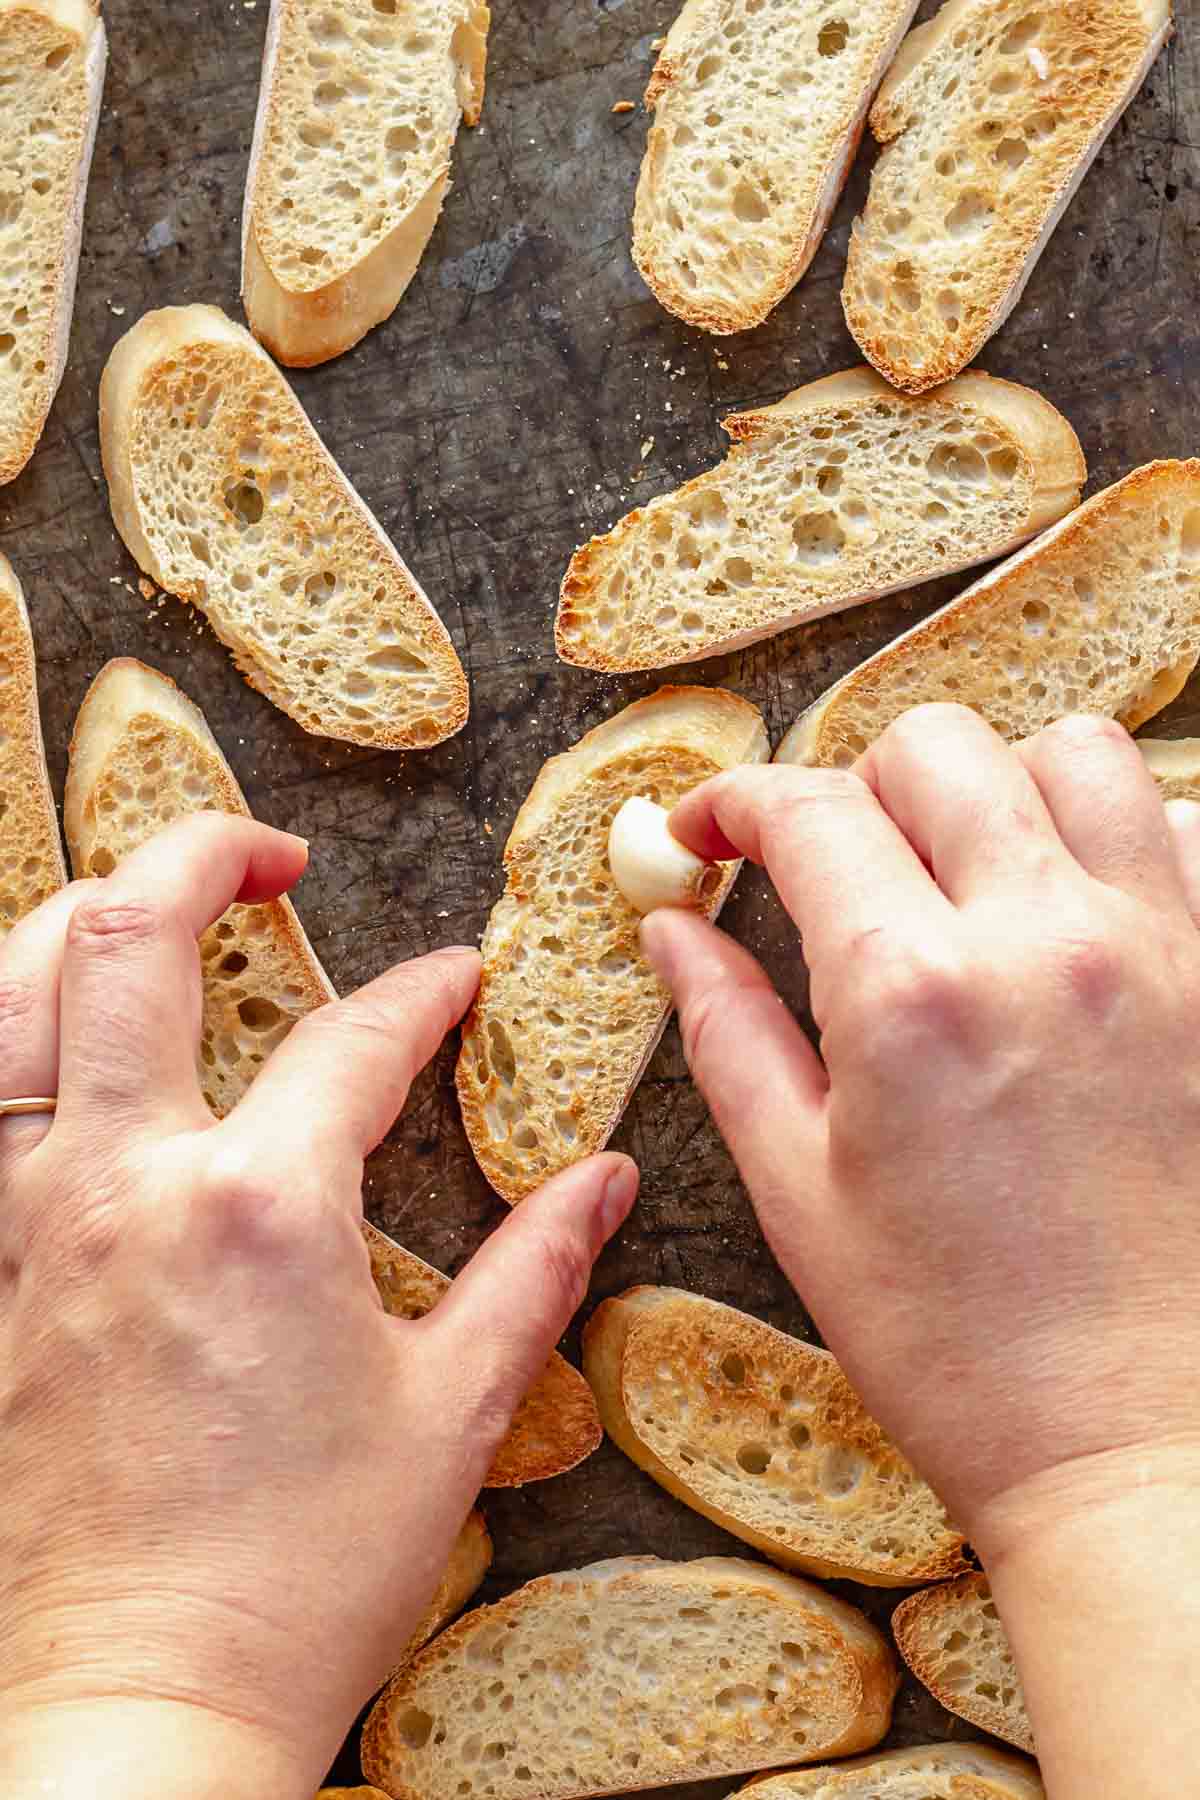 A hand rubs a piece of garlic on toasted baguette slices.